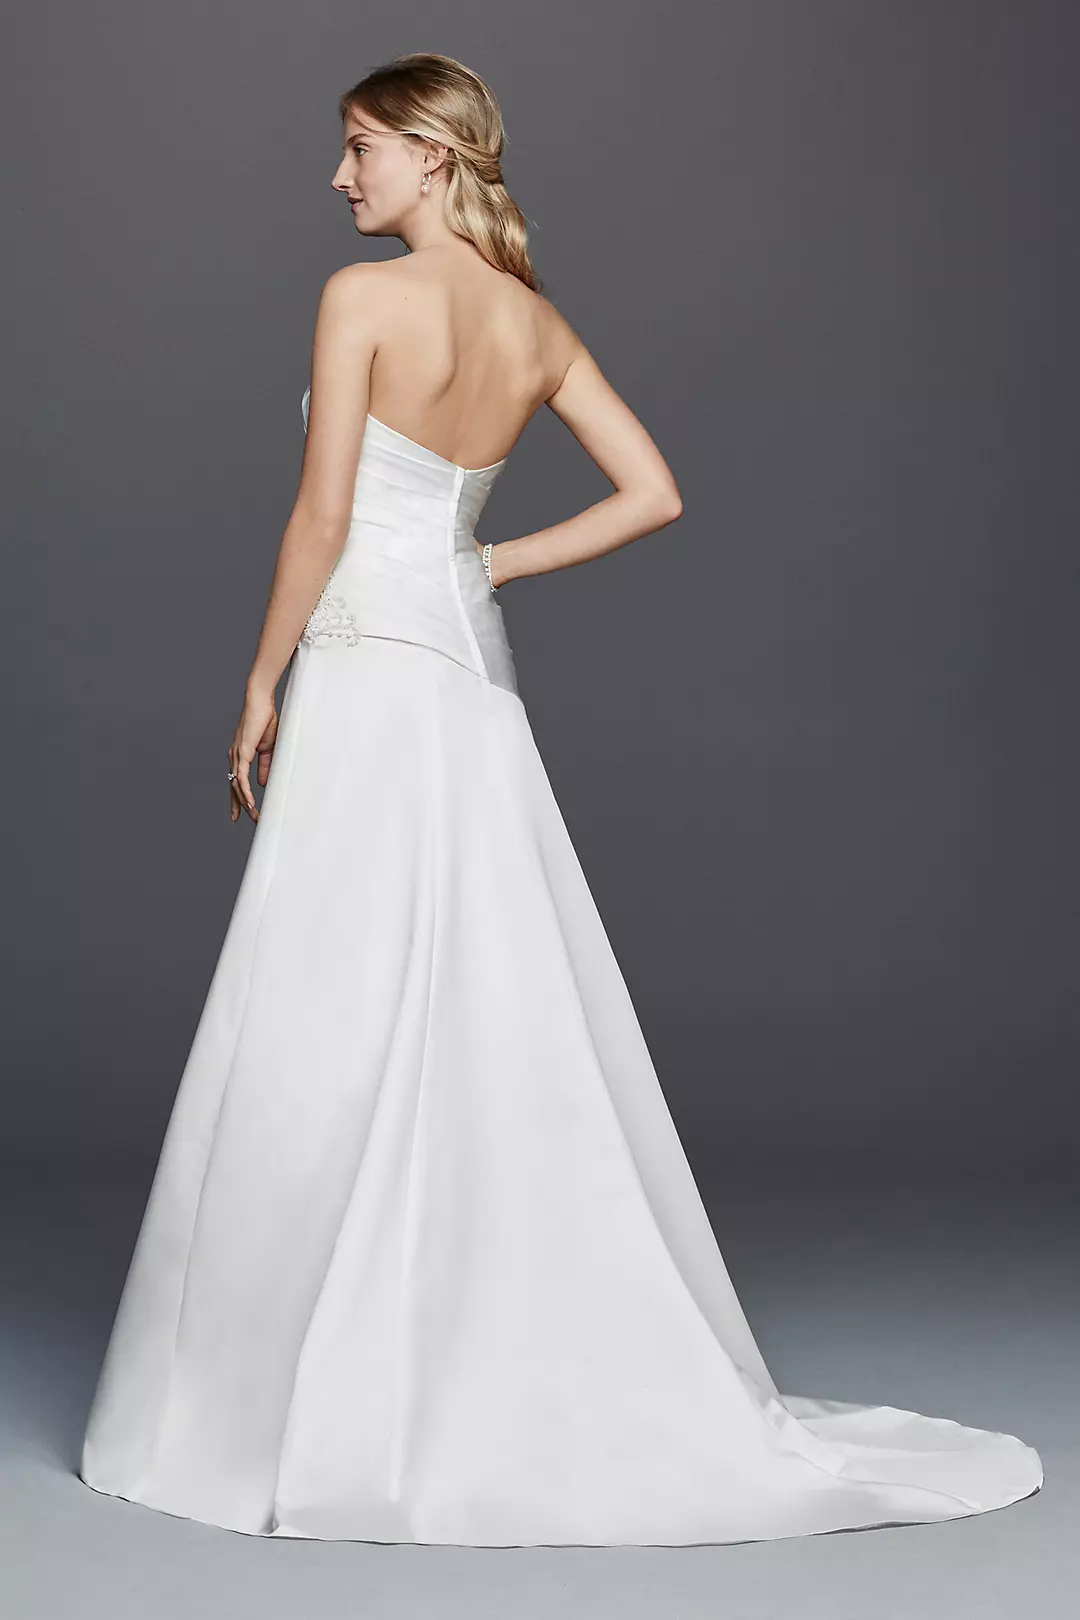 Strapless Ruched Wedding Dress with Lace Image 2